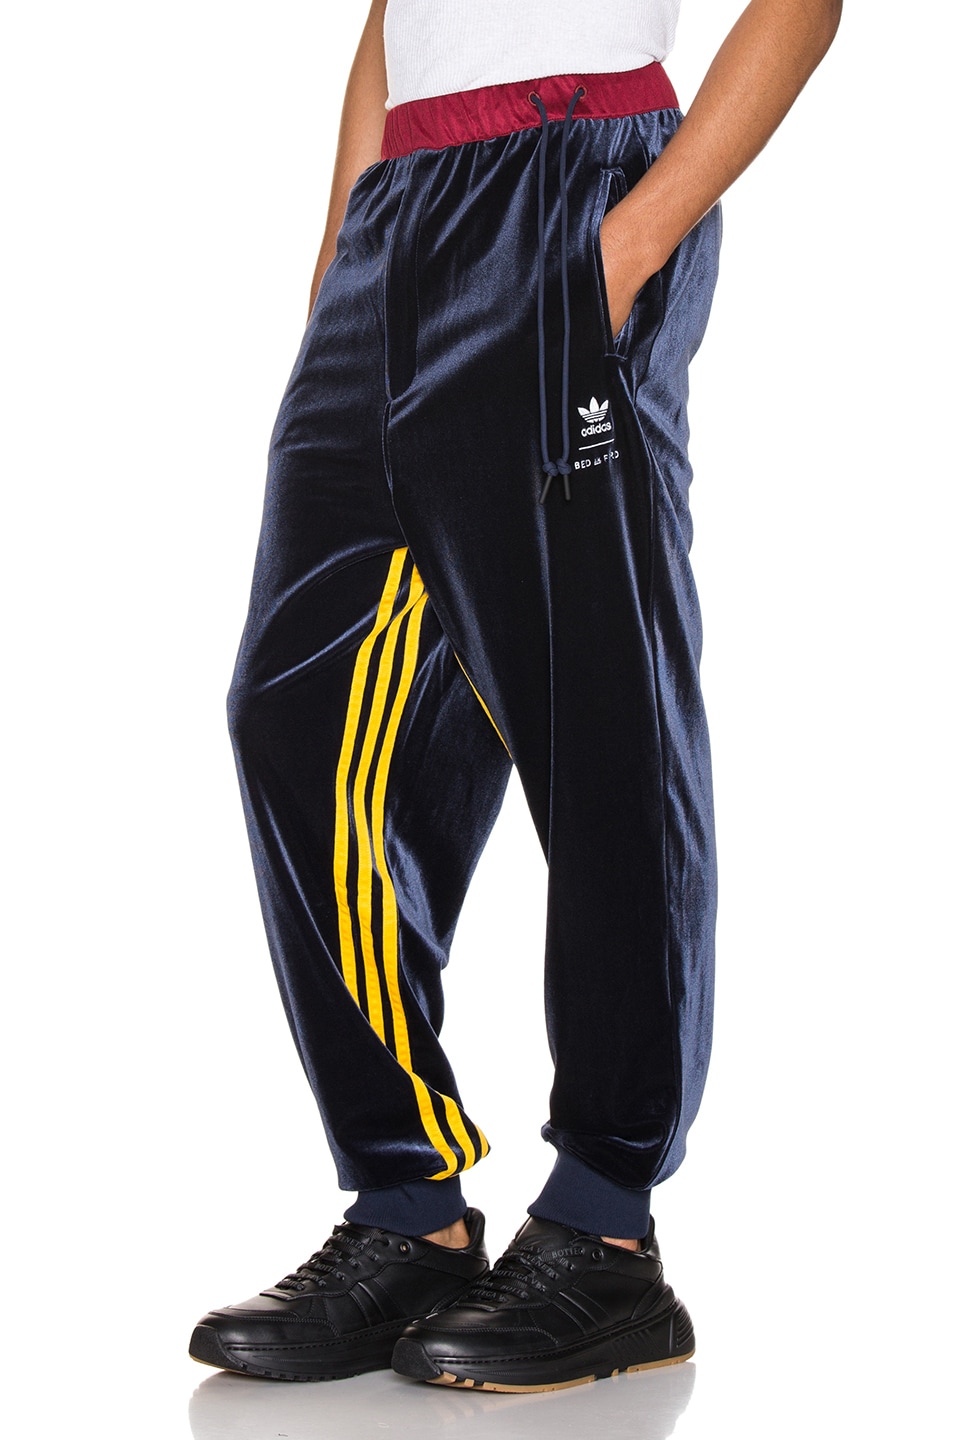 Image 1 of adidas x Bed J.W. Ford Track Pants BW in Legend Ink F17